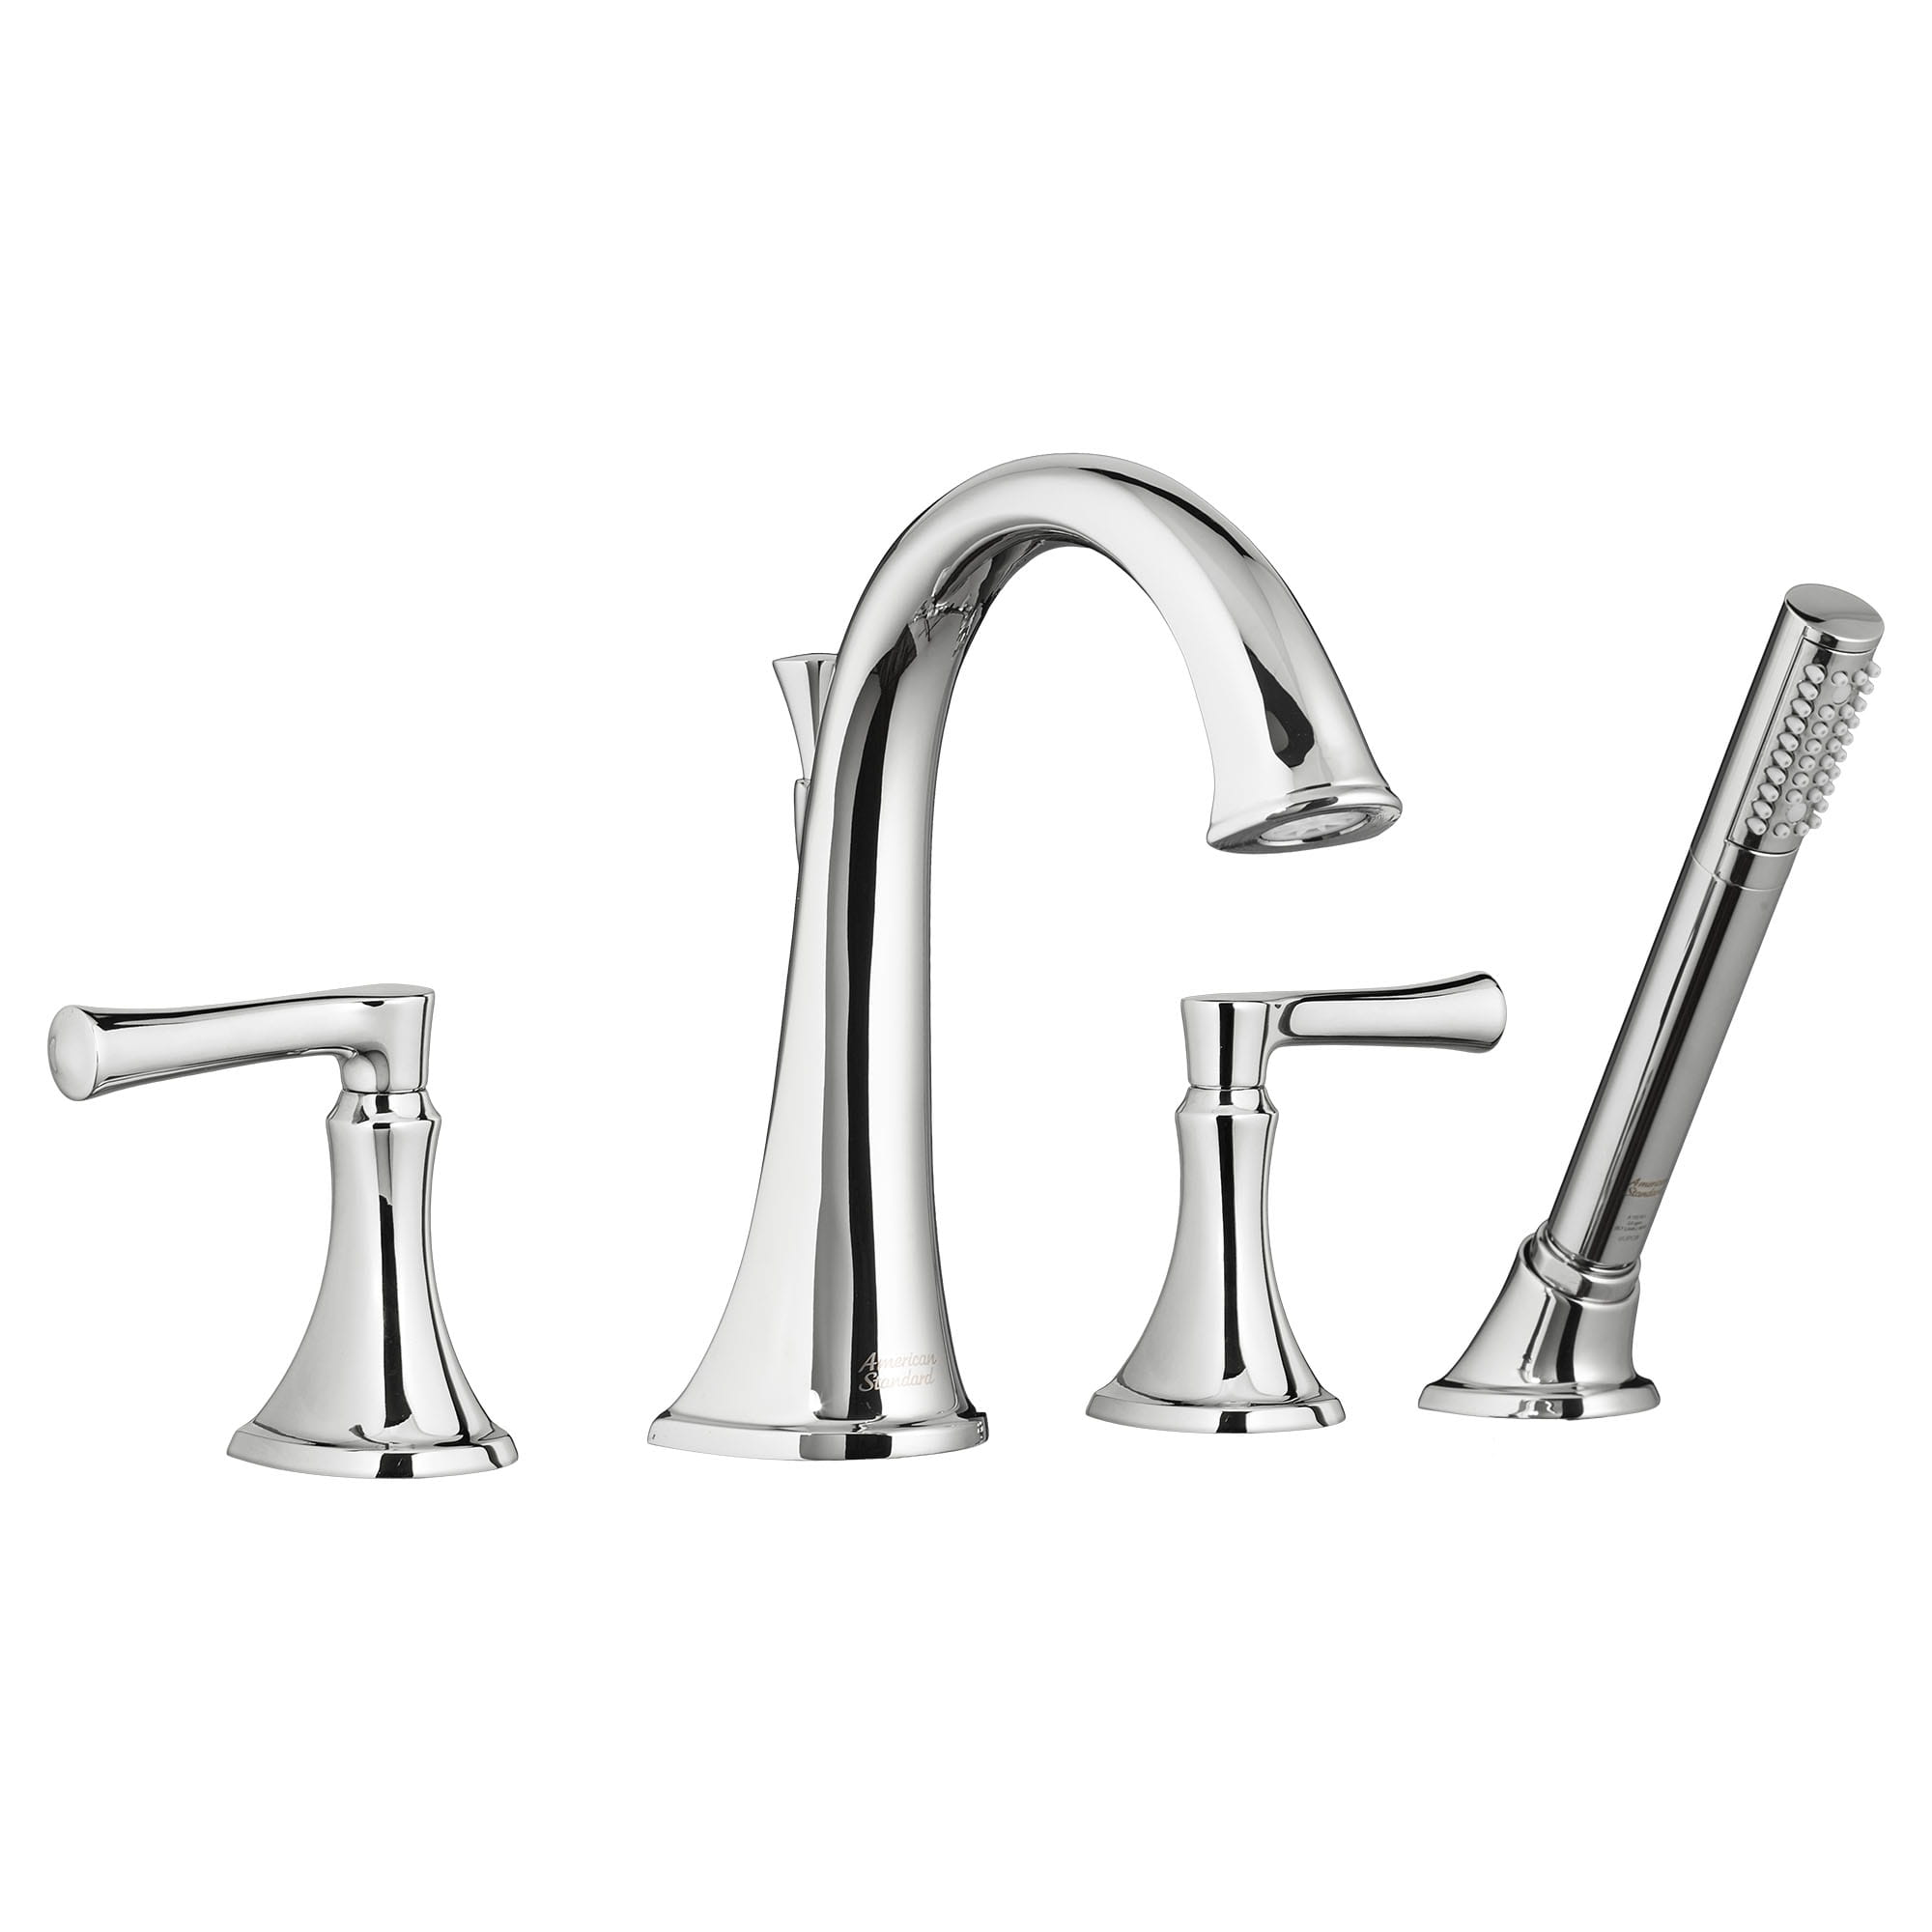 Estate Bathtub Faucet With Personal Shower for Flash Rough In Valve With Lever Handles CHROME